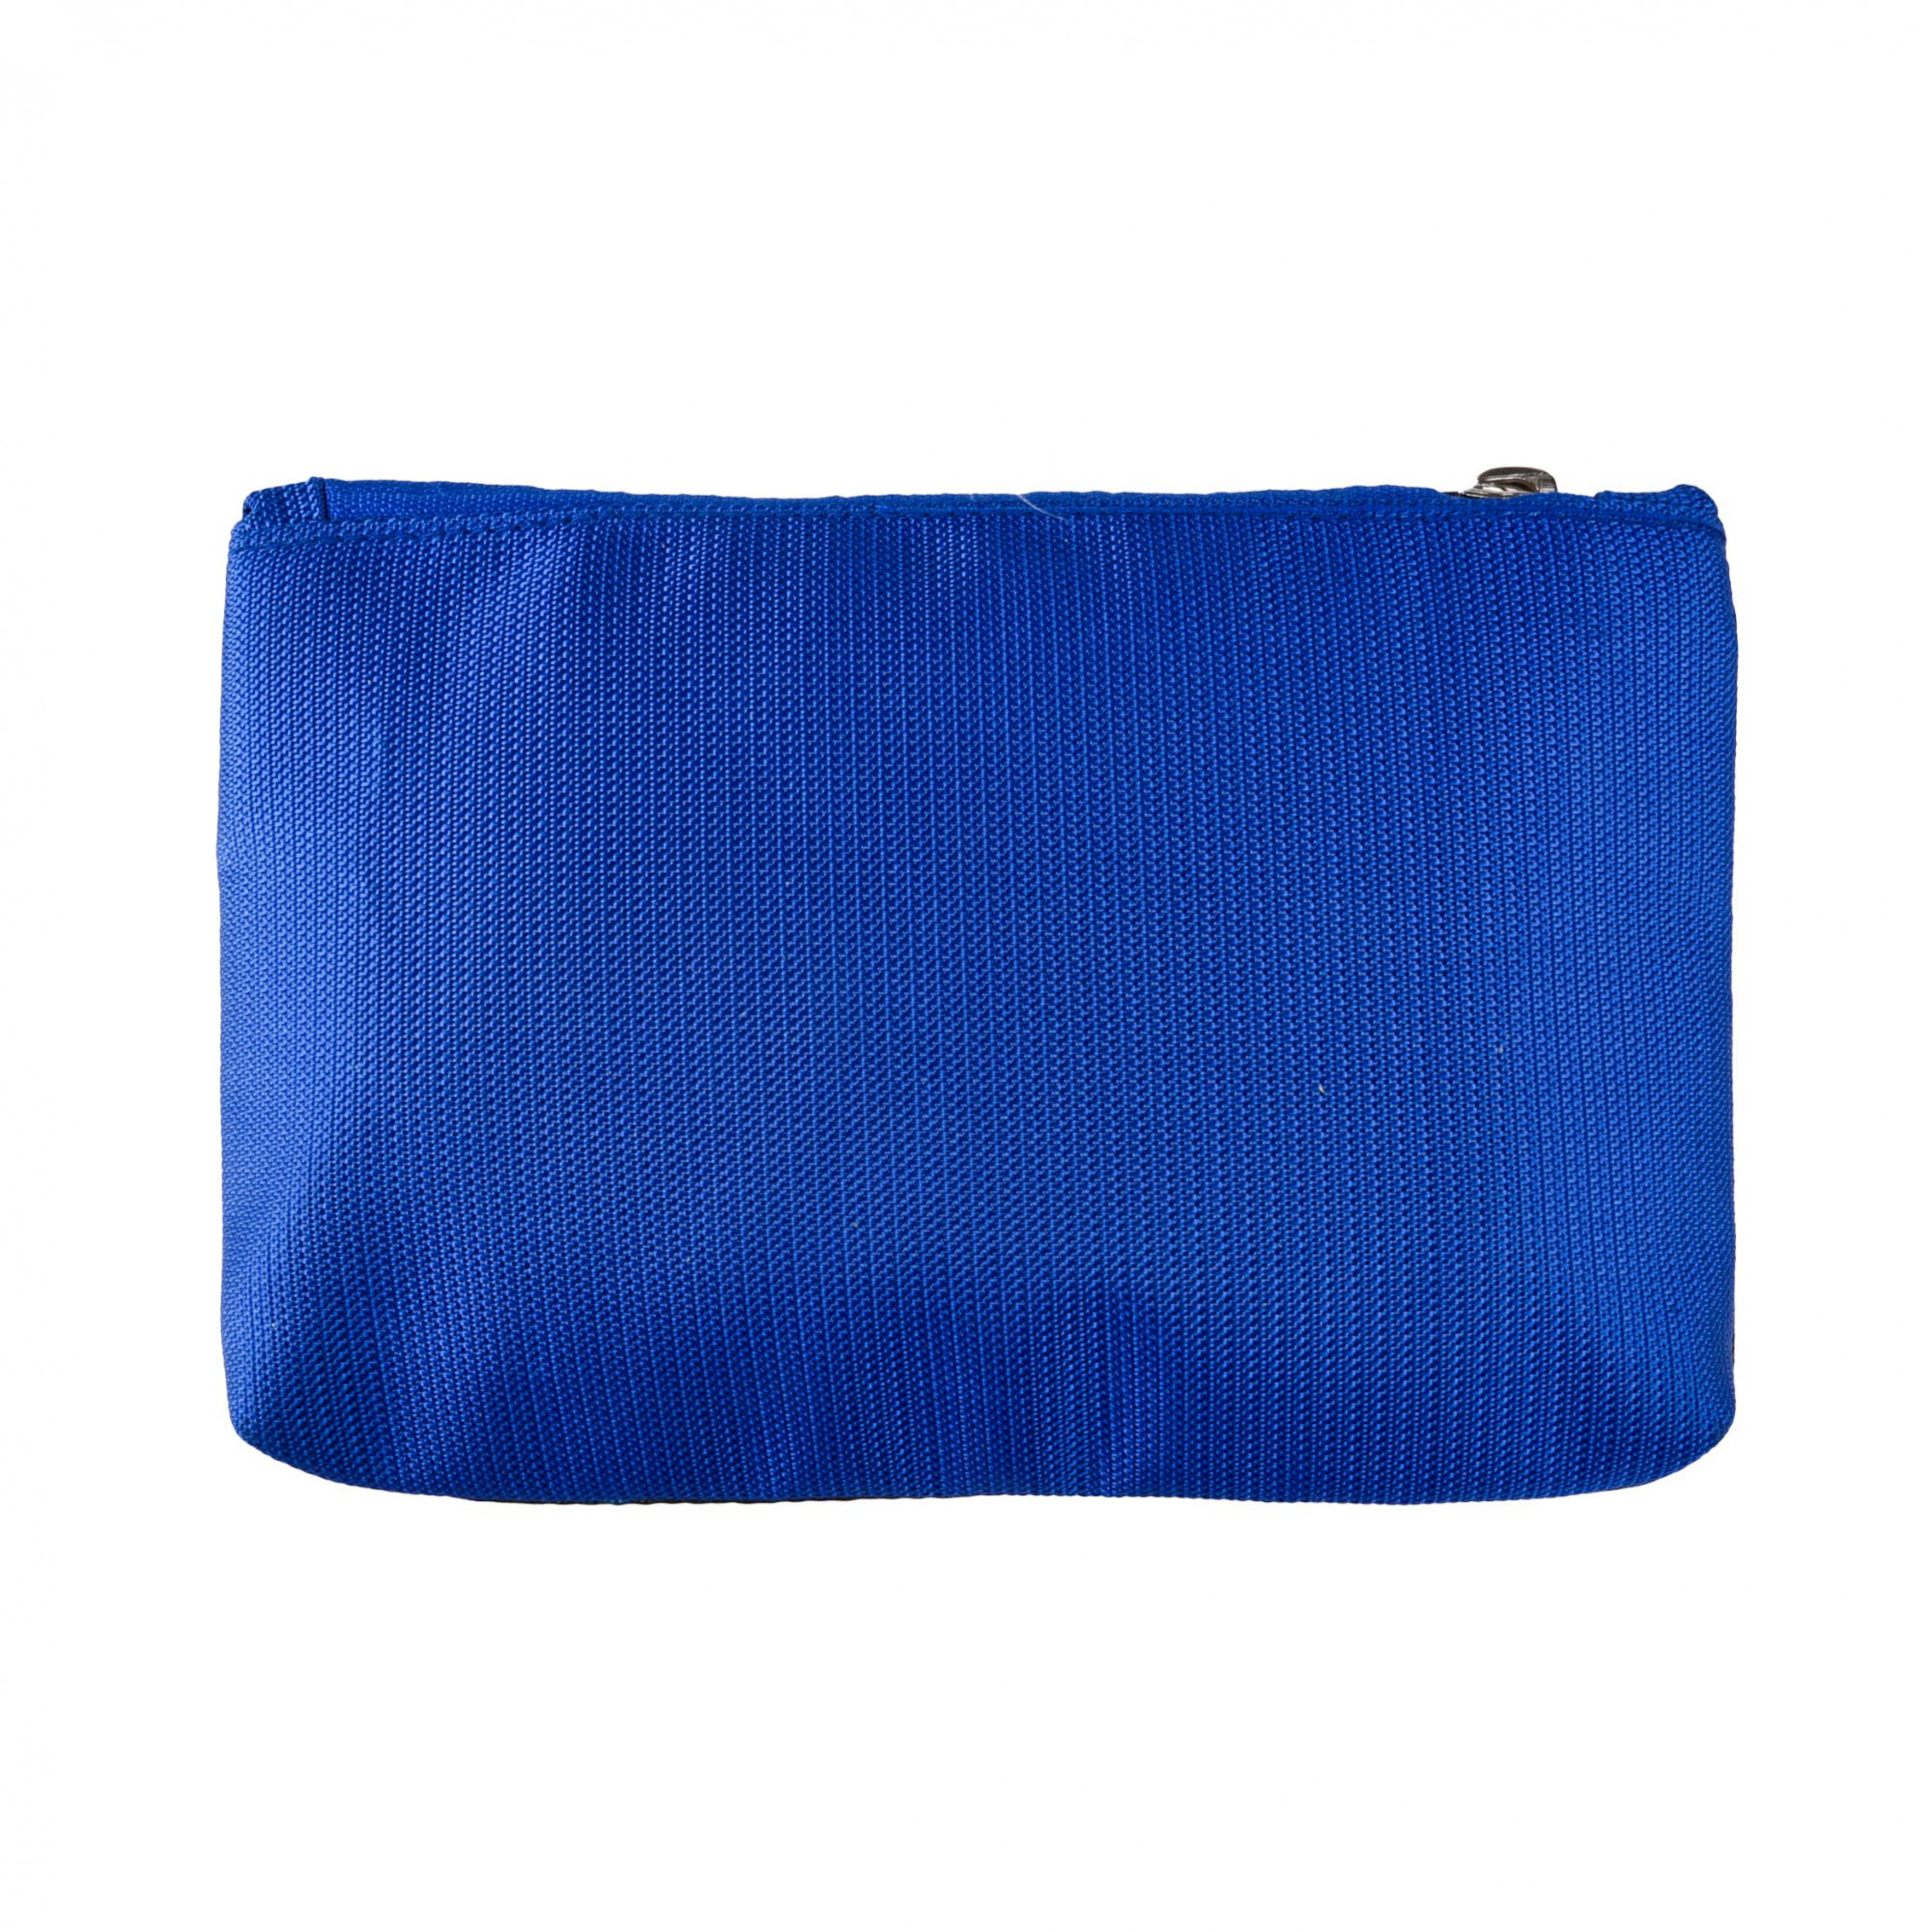 Kuber Industries Pencil Pouch | Square Stationary Pouch | Pen-Pencil Box for Kids | School Geometry Pouch | Pencil Utility Bag | Marvel Pencil Organizer | Royal Blue & Navy Blue